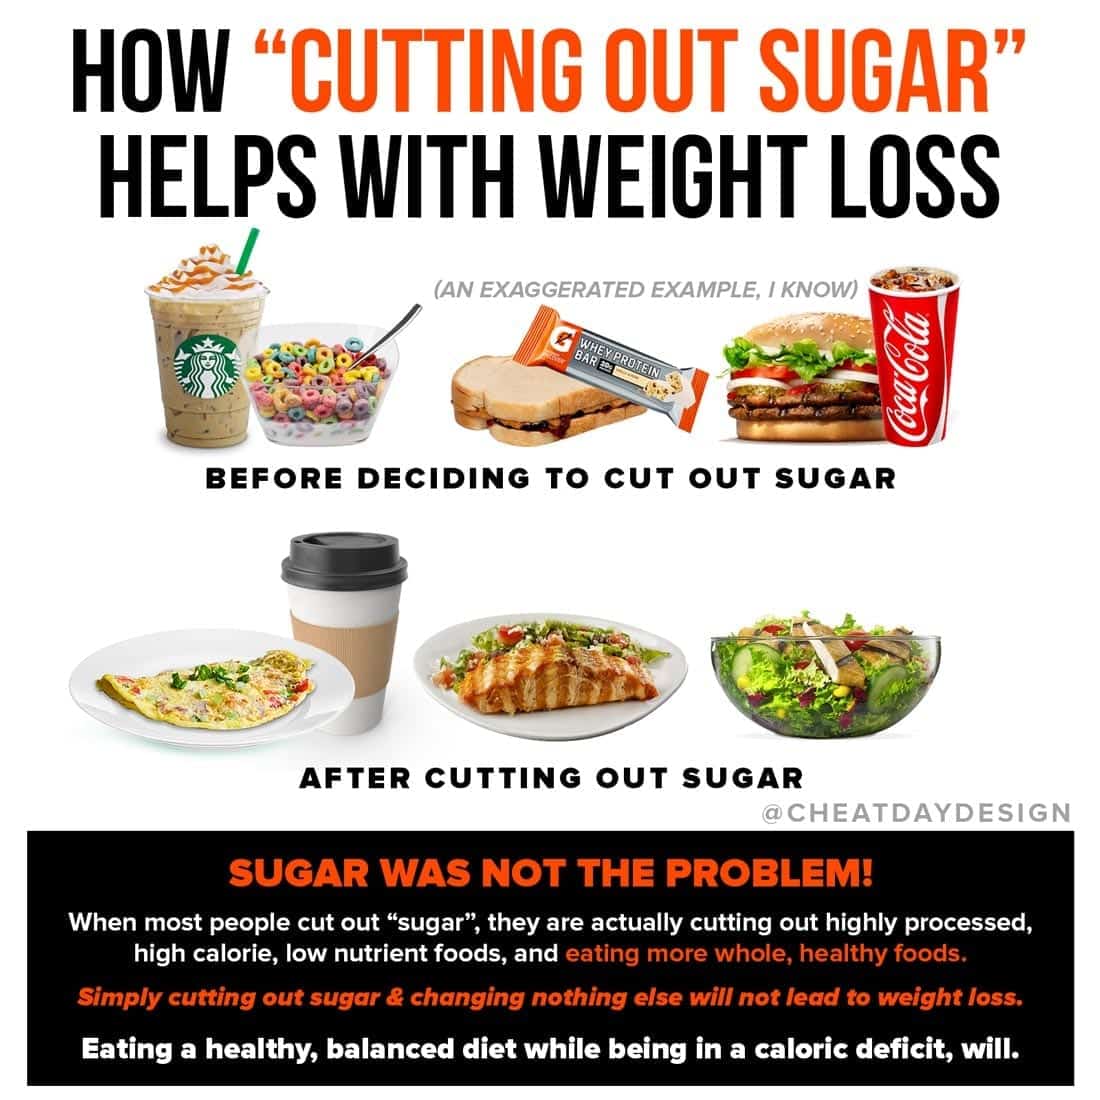 Does Cutting Out Sugar Lead To Weight Loss?